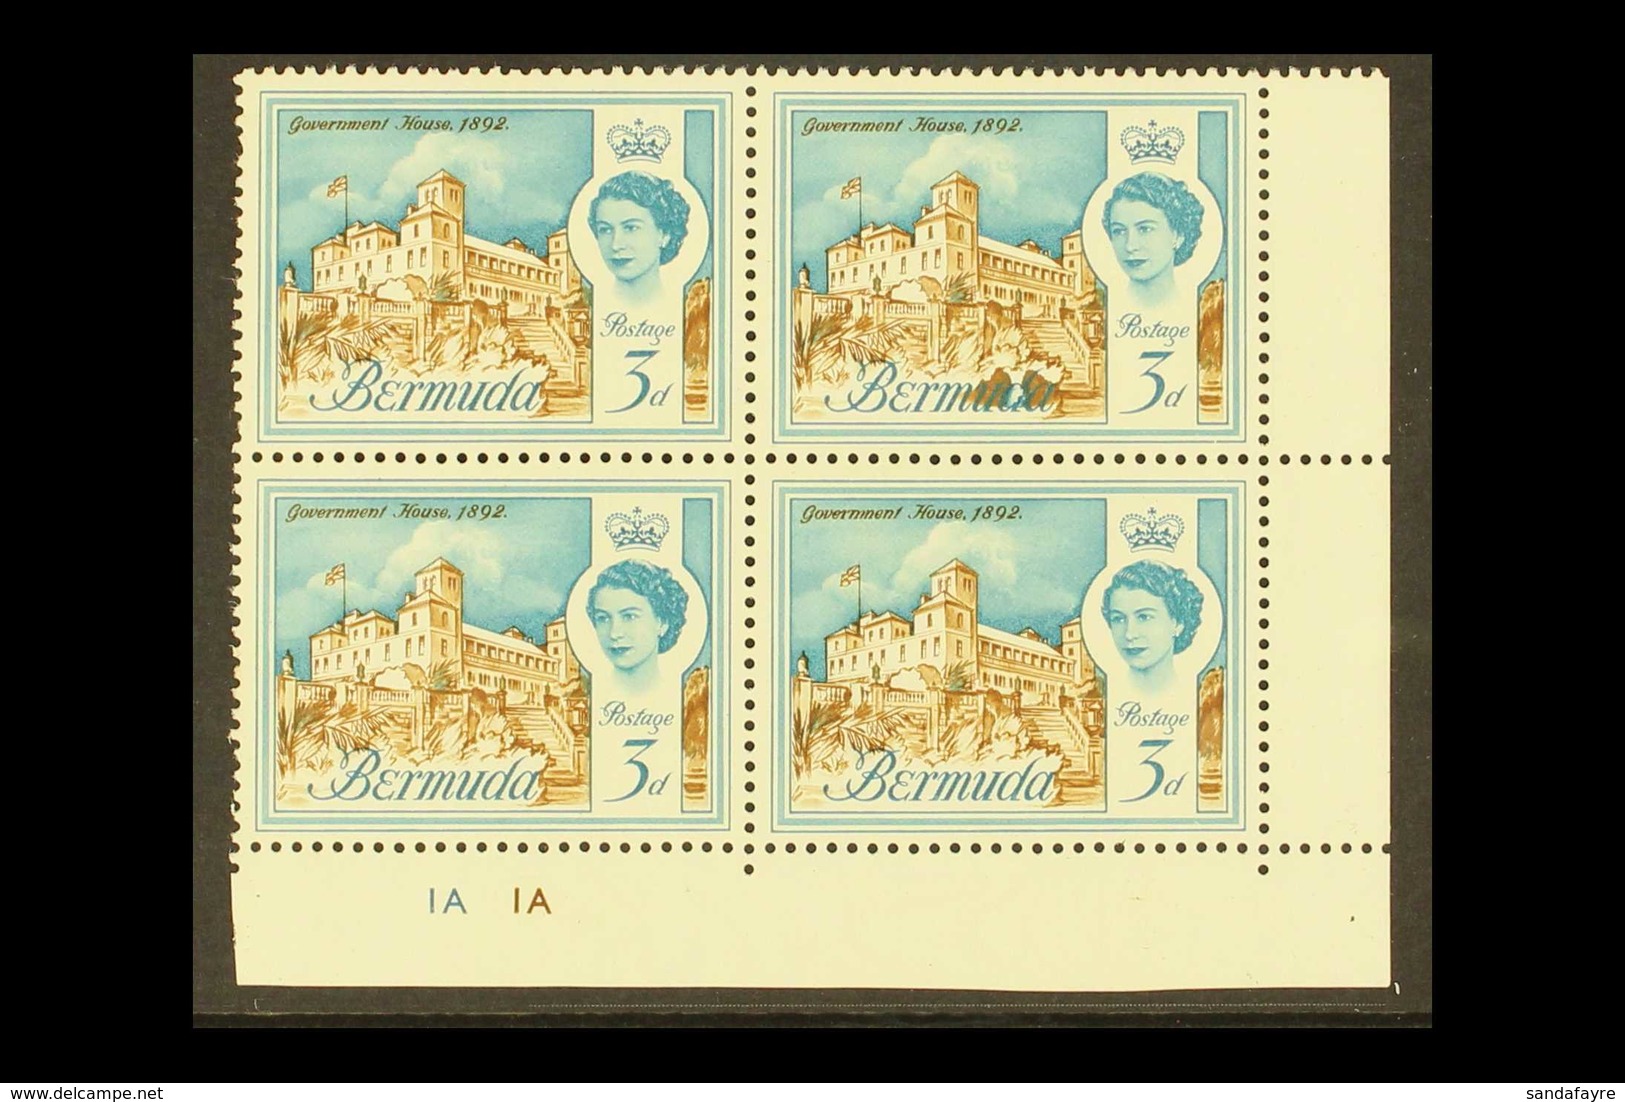 1962-68 3d Definitive, SG 165, Never Hinged Mint Lower Right PLATE BLOCK Of 4 With One Stamp Showing Large PRINTING FLAW - Bermudas